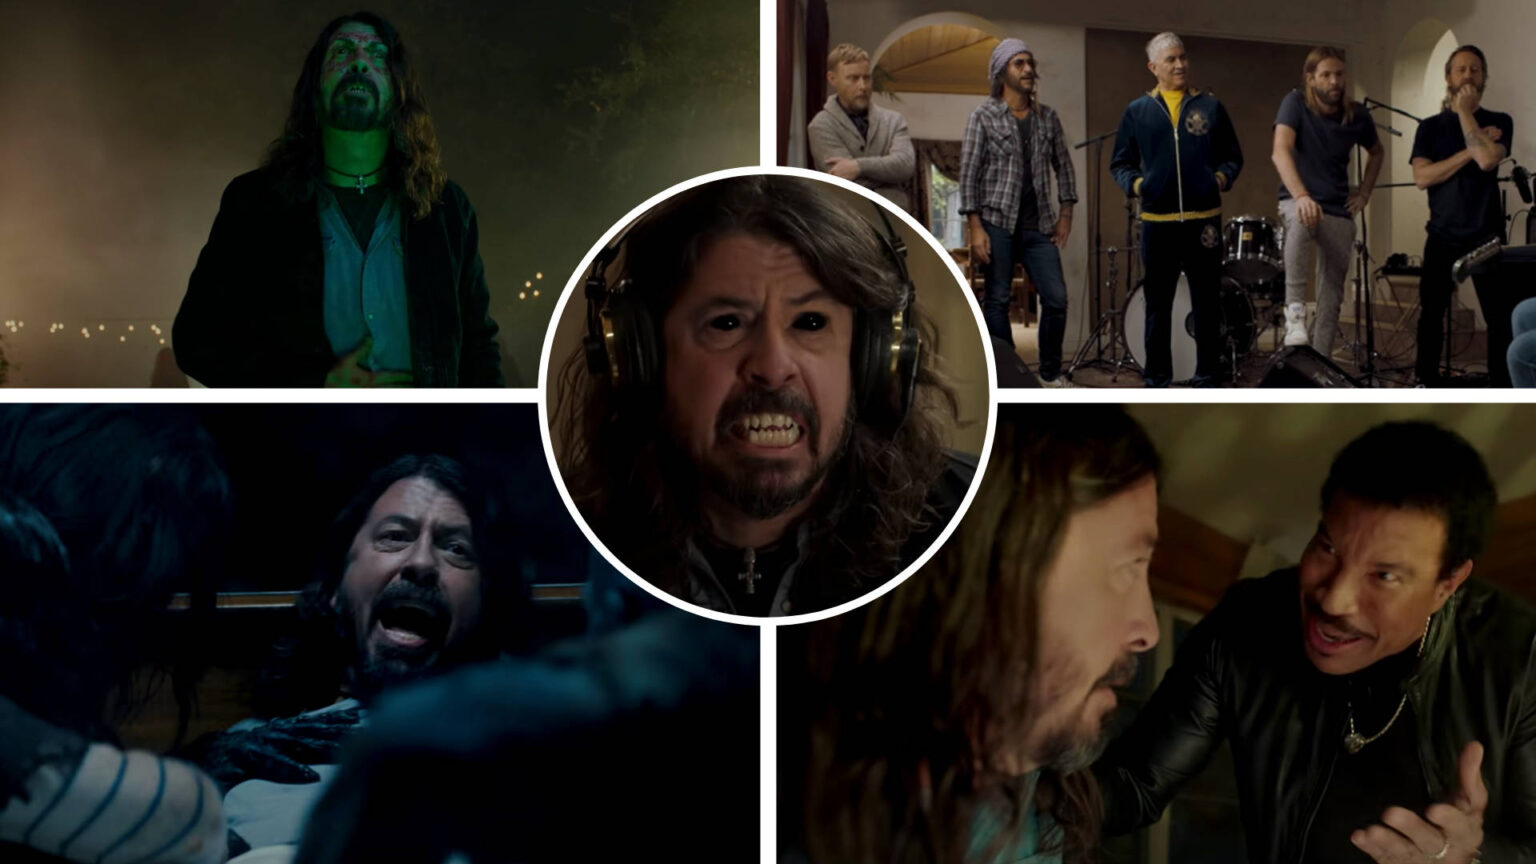 Did you know that your favorite band made a movie? Check out the Foo Fighters's horror film 'Studio 666' for yourself for free online today.